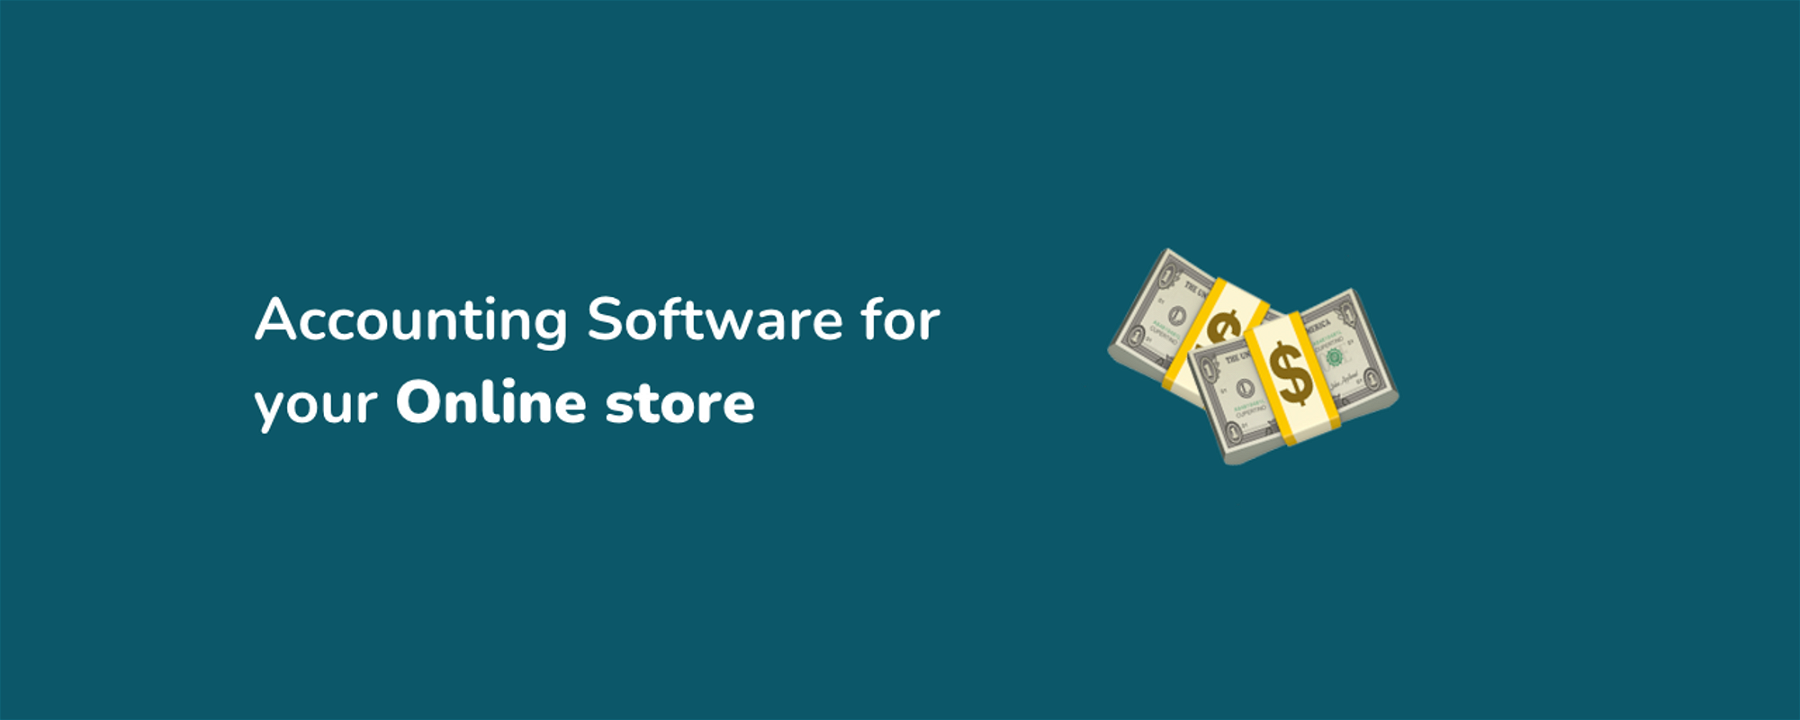 Accounting Software for your Online store